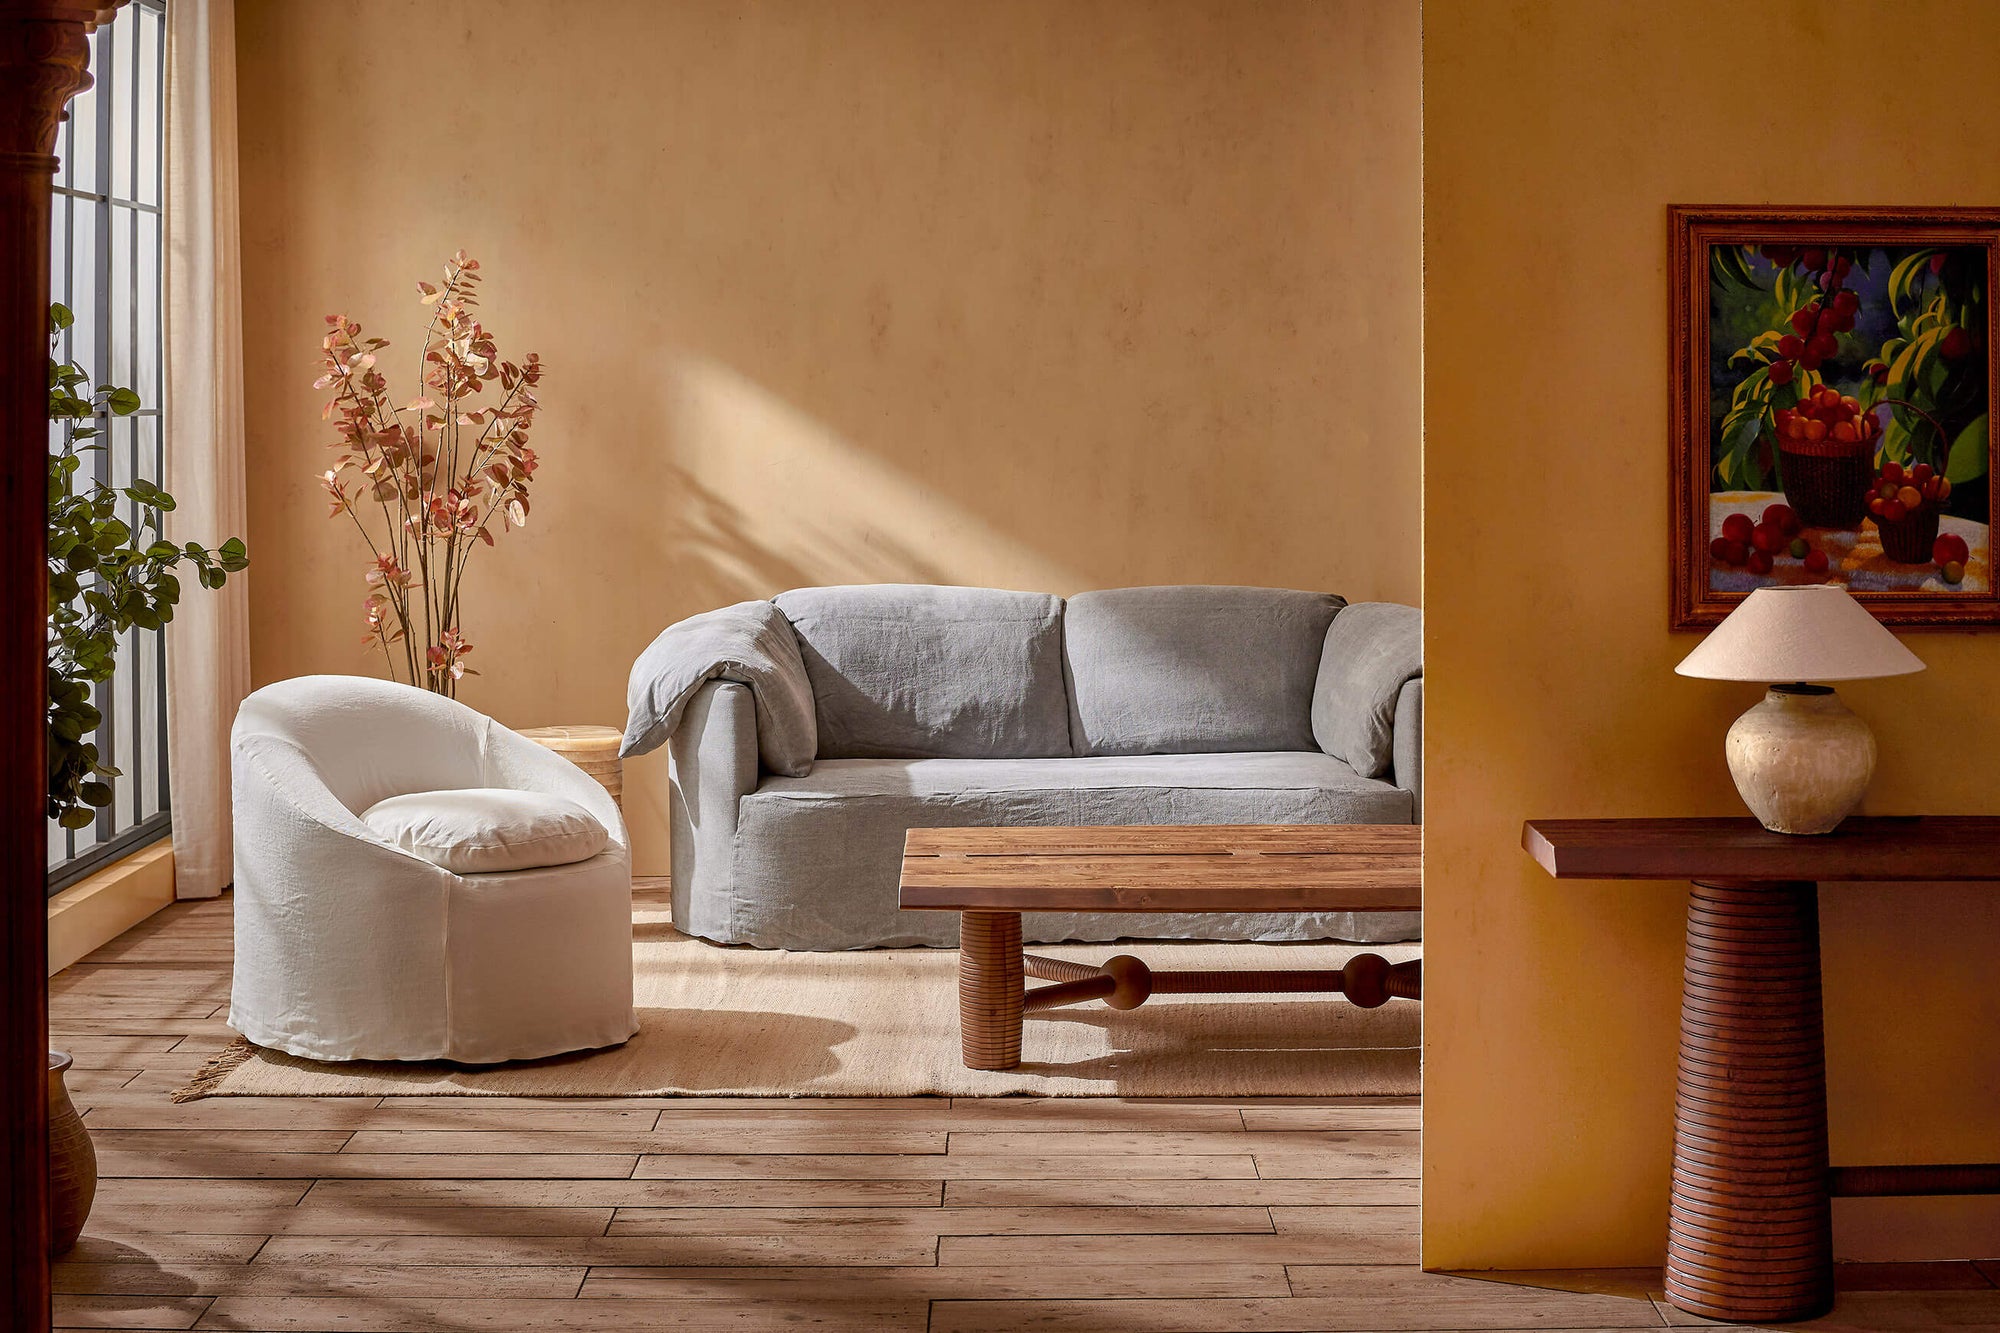 Loula Sofa in Ink Cap, a medium cool grey Light Weight Linen,with an Ozzi Chair and Zenia Coffee Table